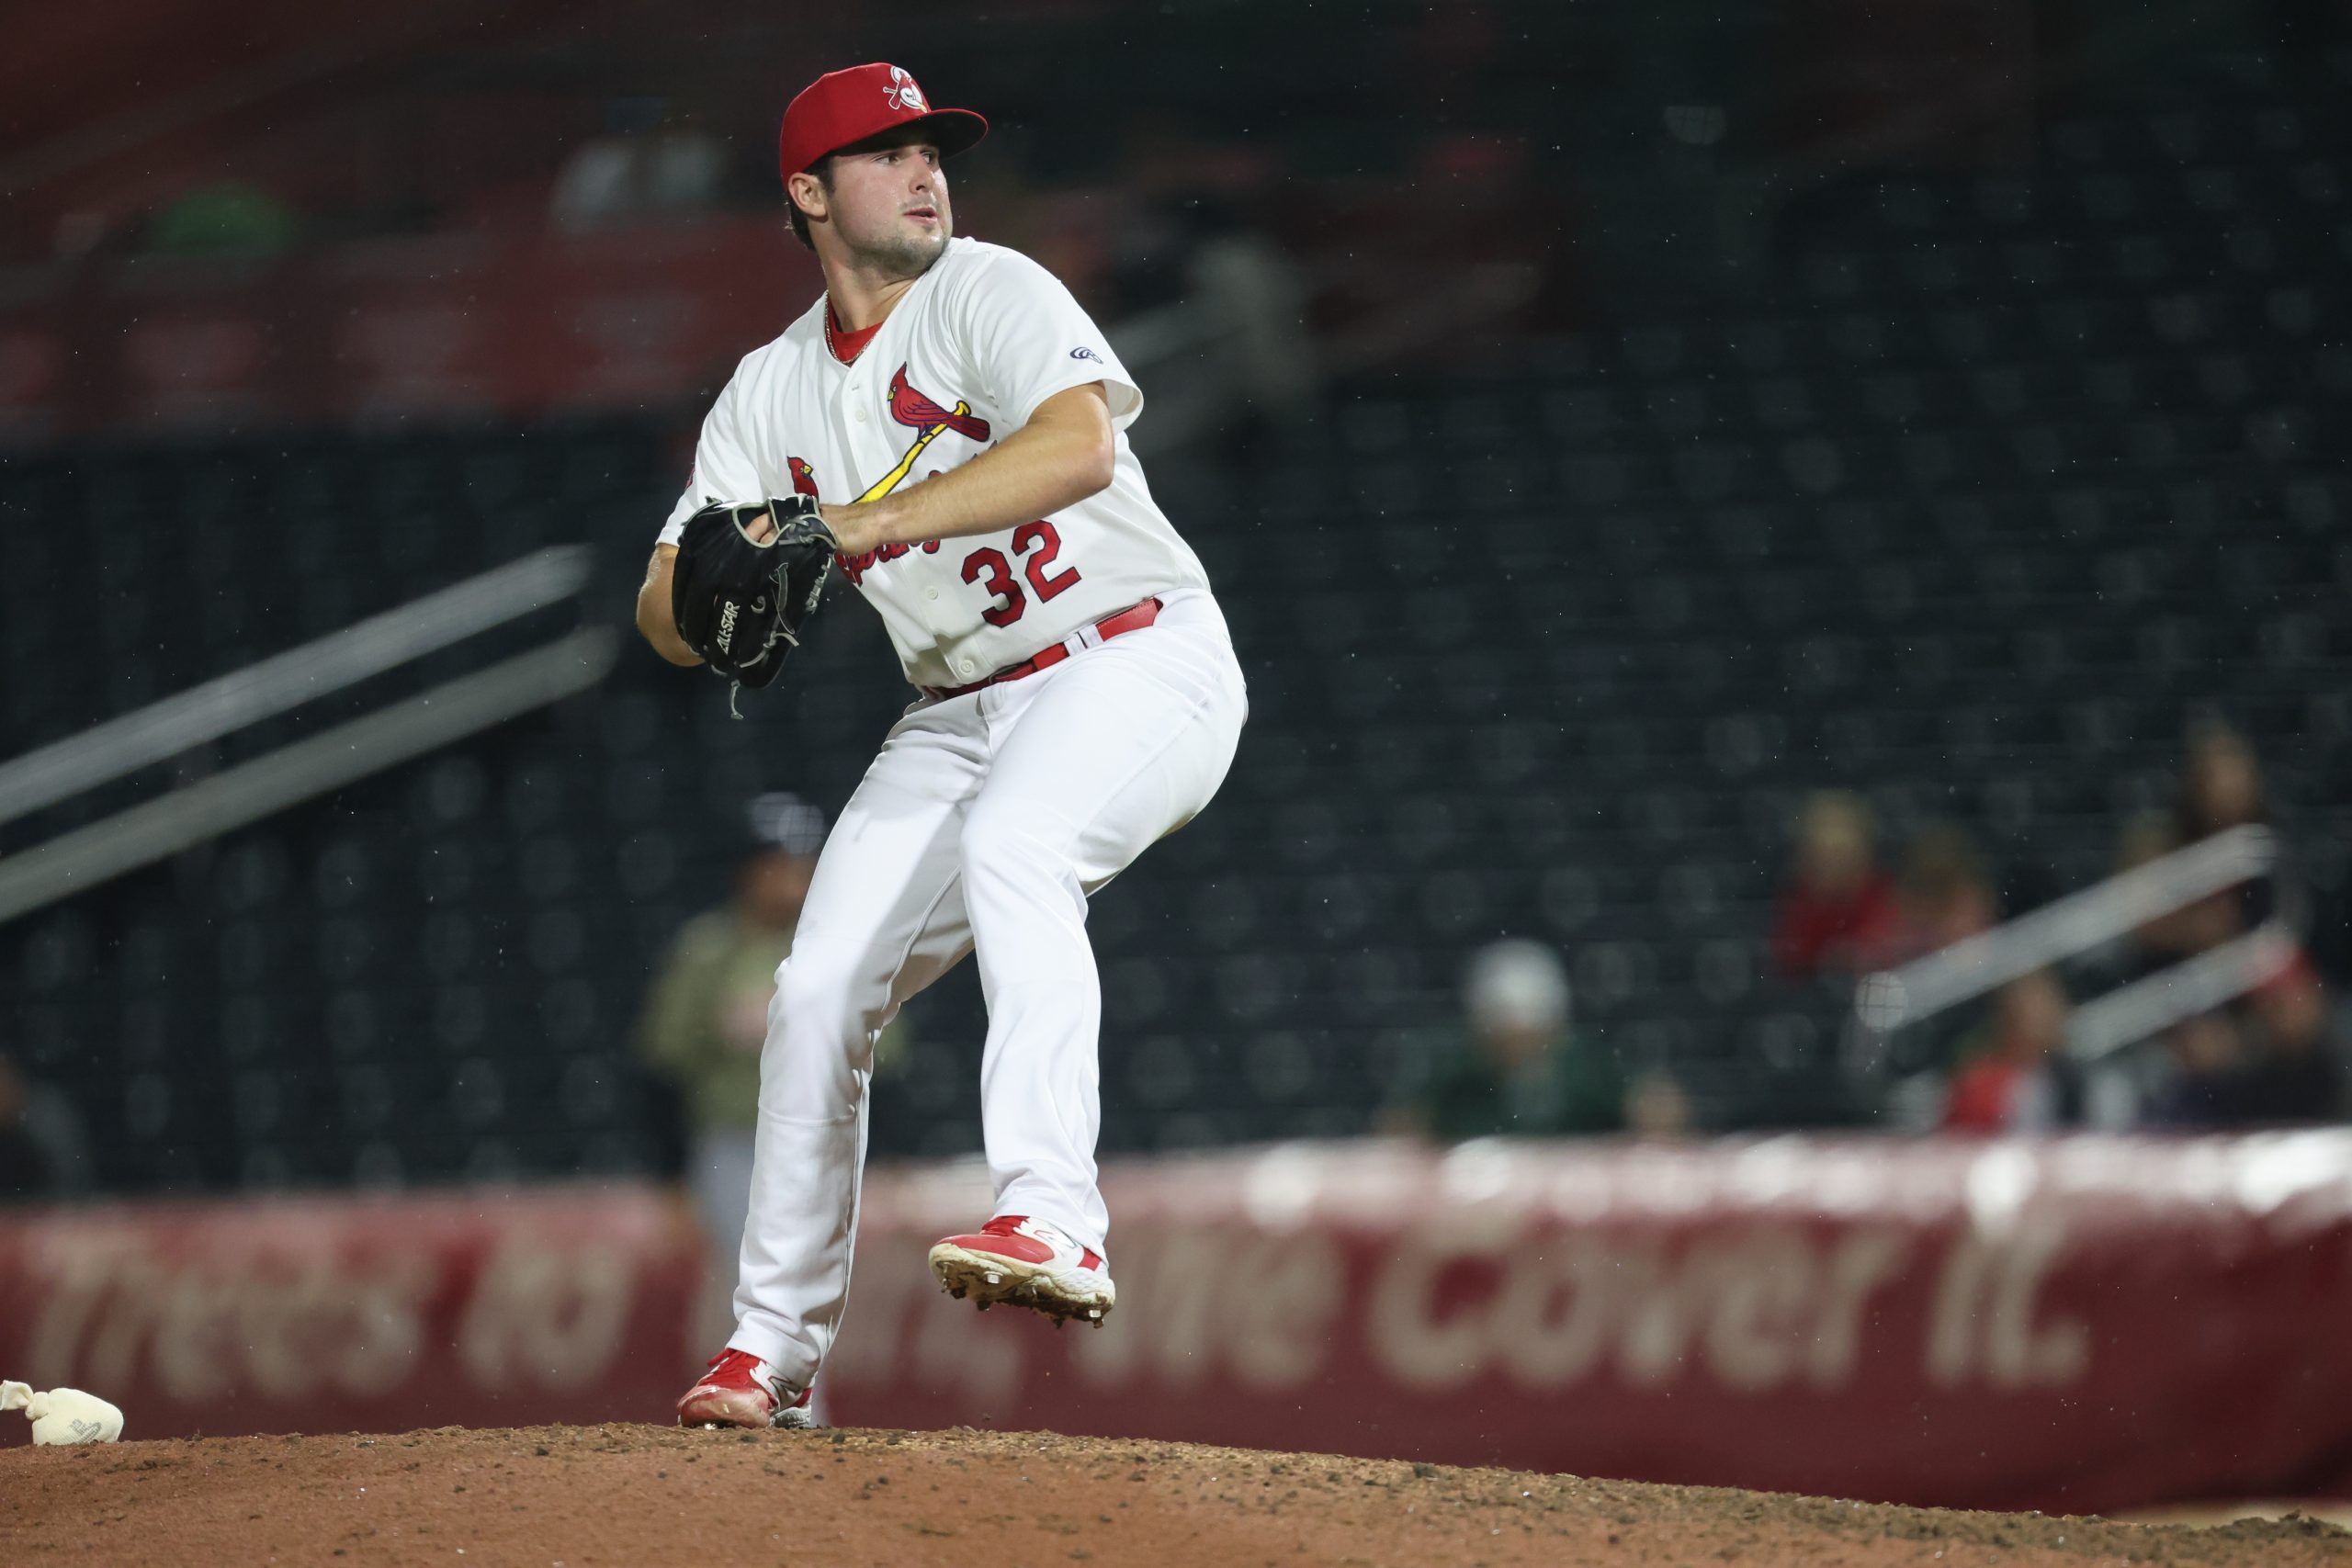 Max Rajcic, wearing a Springfield Cardinals uniform, pitches during a game at Hammons Field